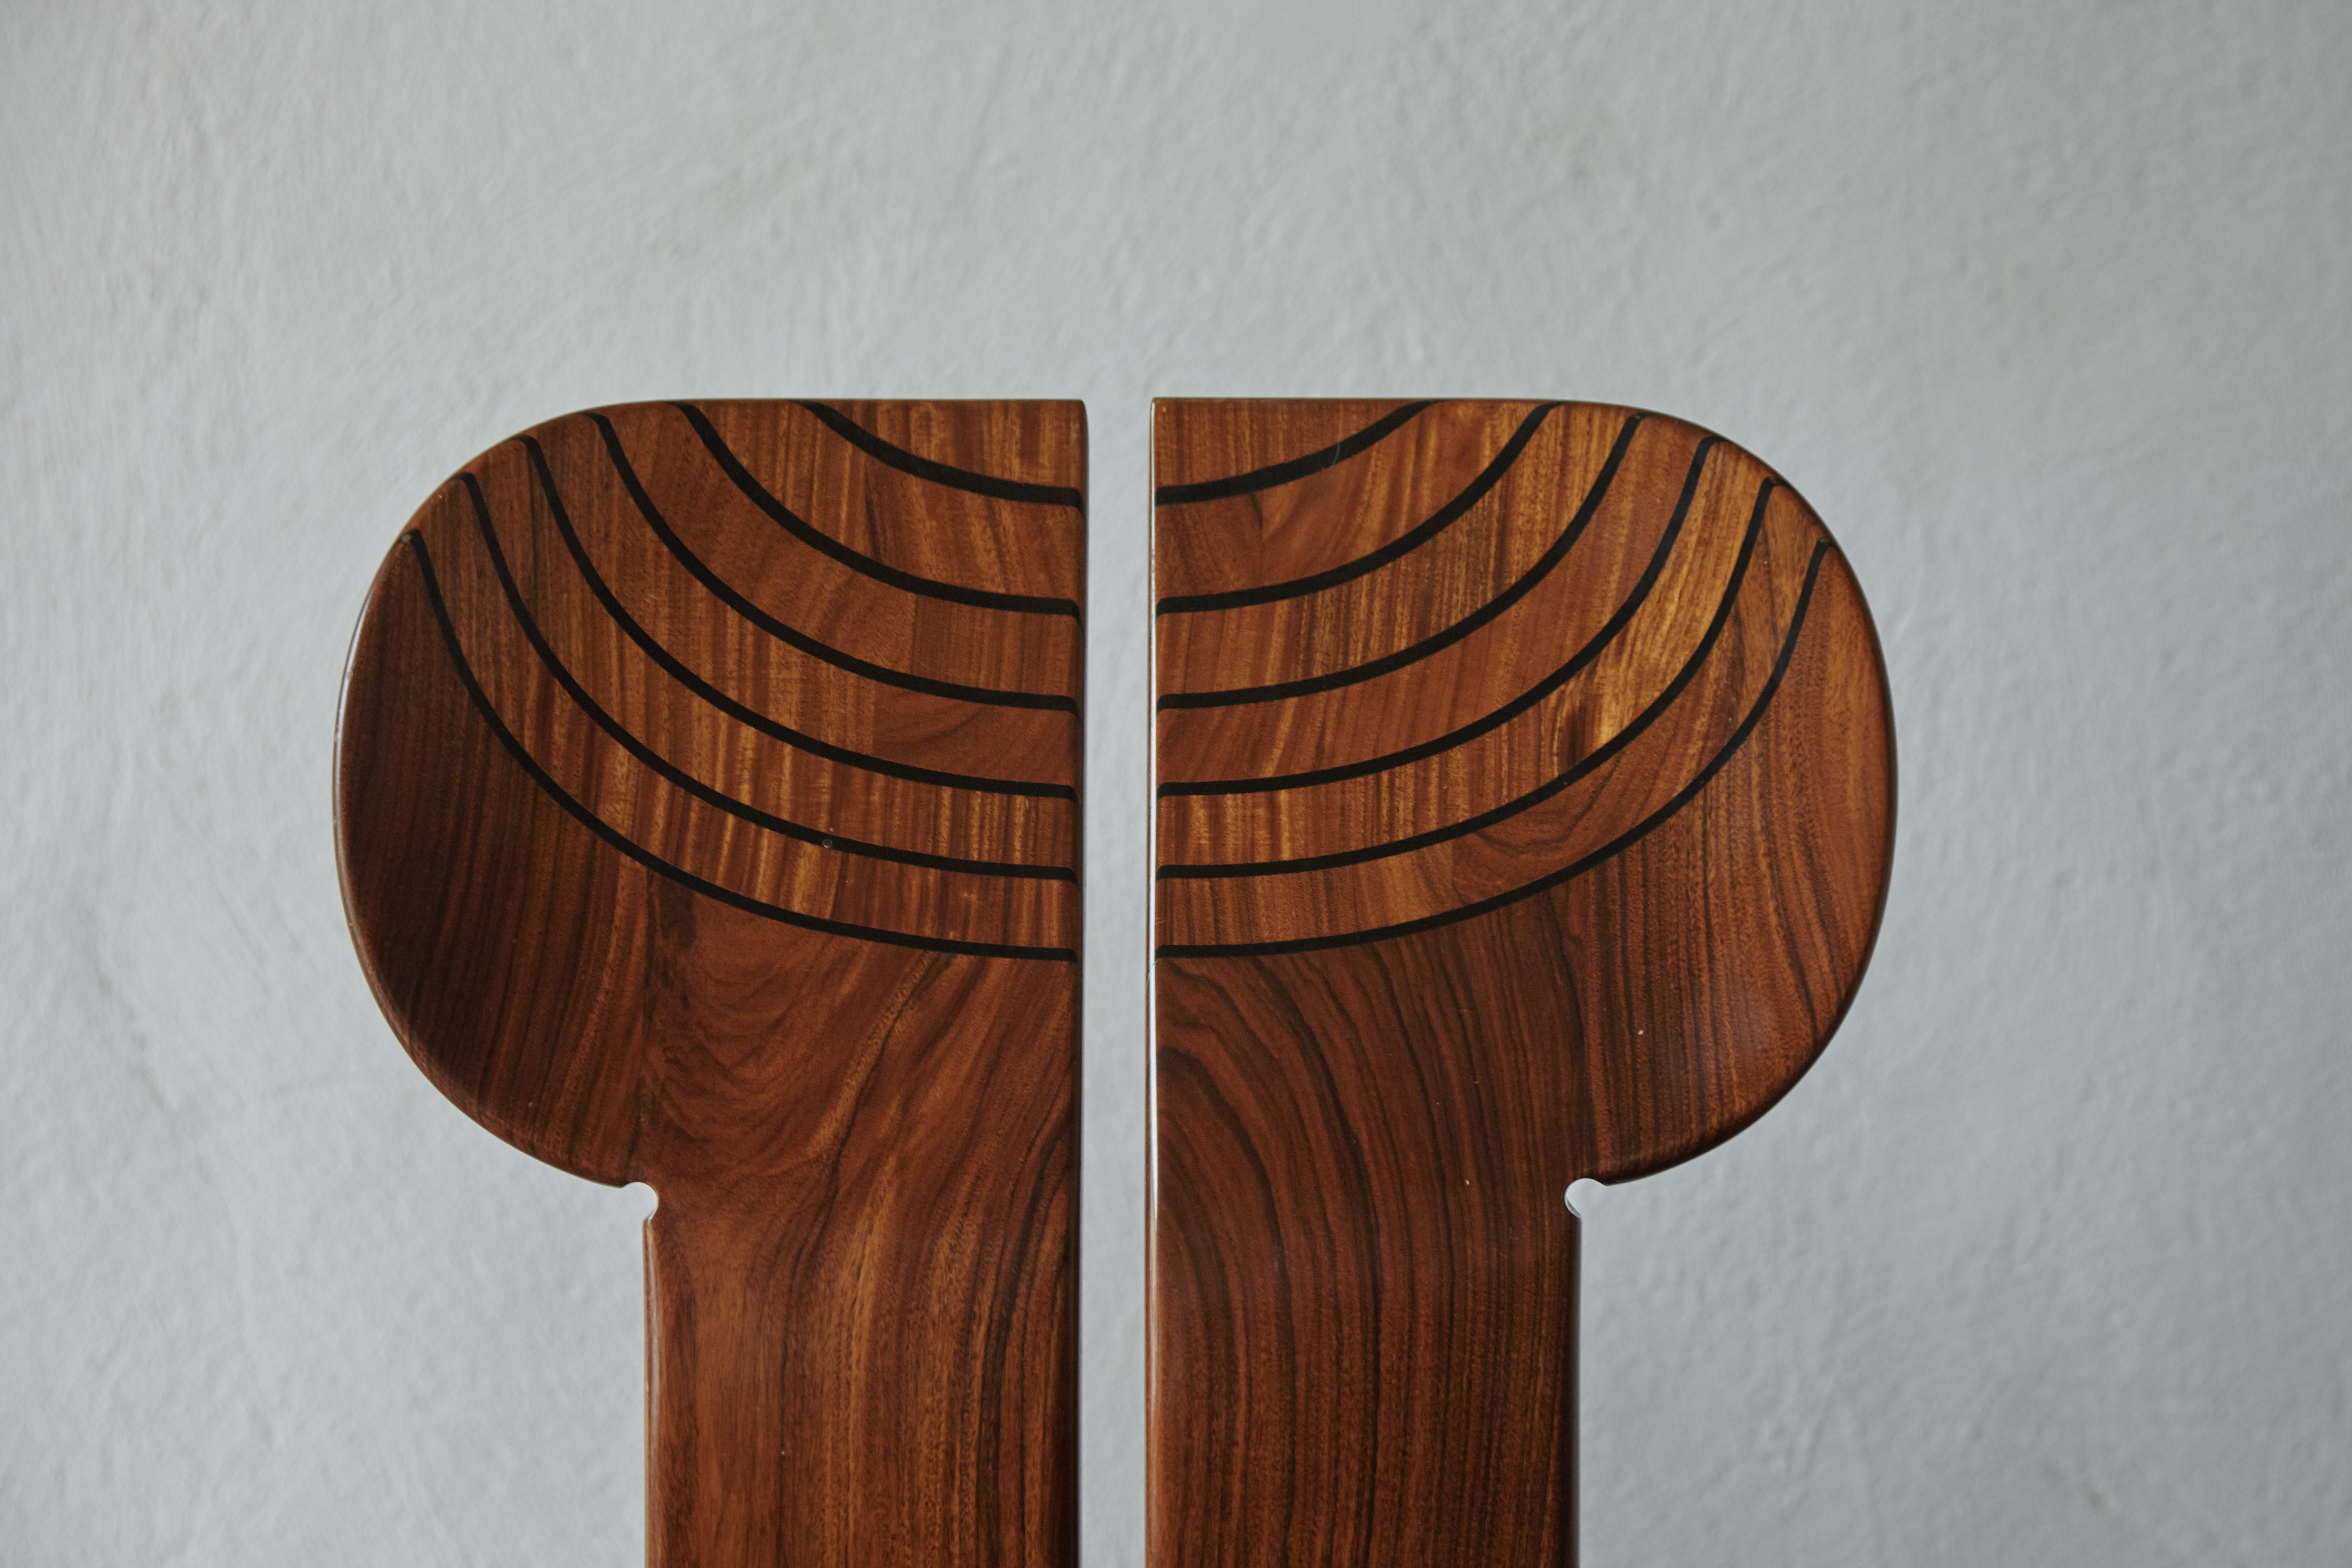 20th Century Africa Chairs by Afra & Tobia Scarpa, Maxalto, Italy, 1970s-1980s